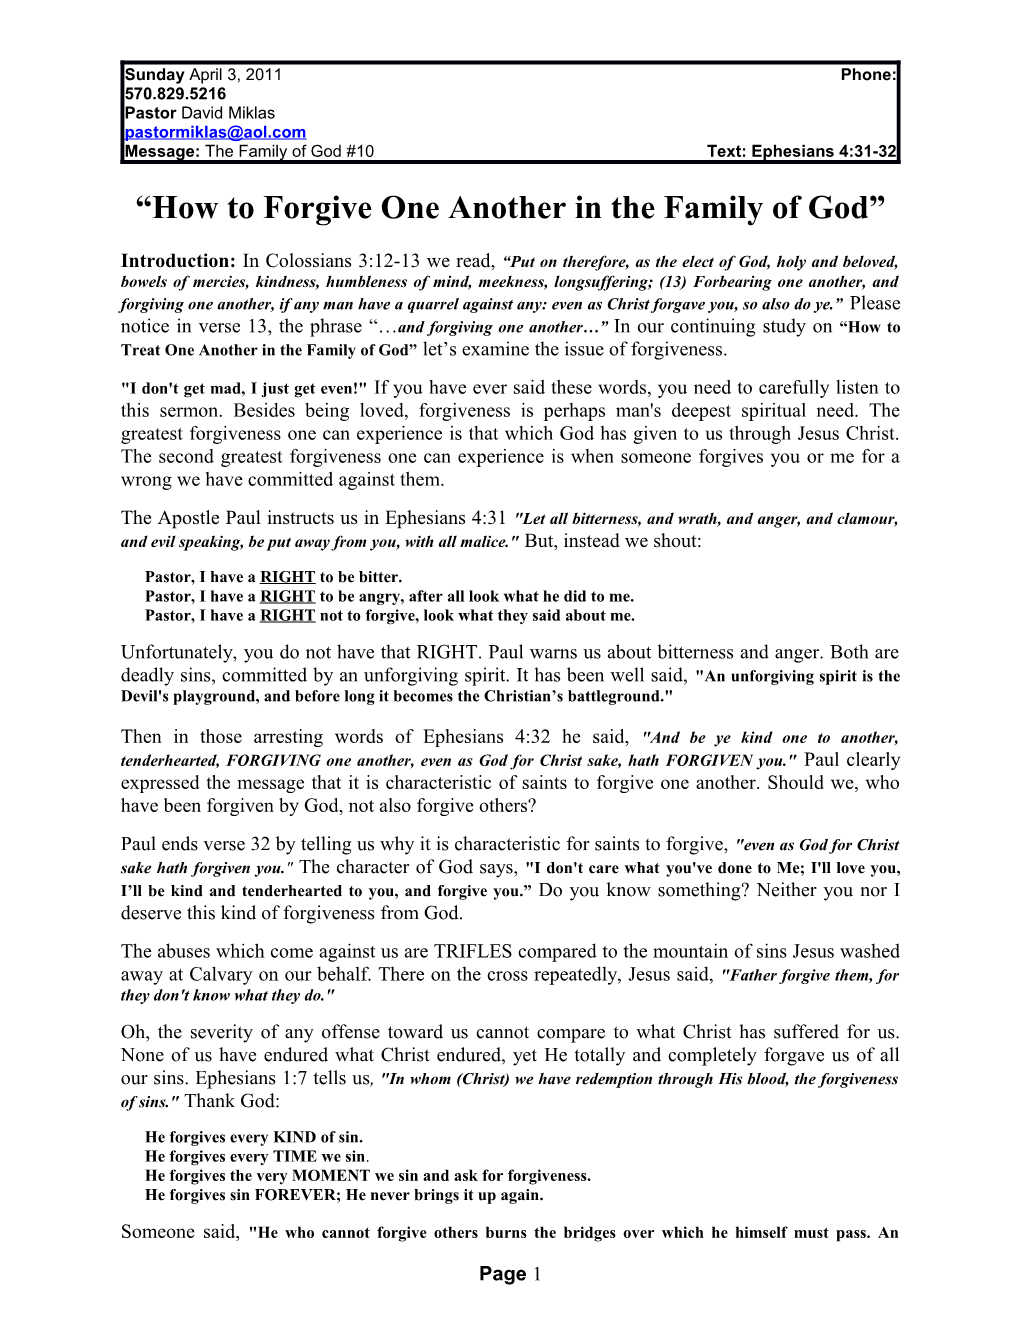 How to Forgive One Another in the Family of God